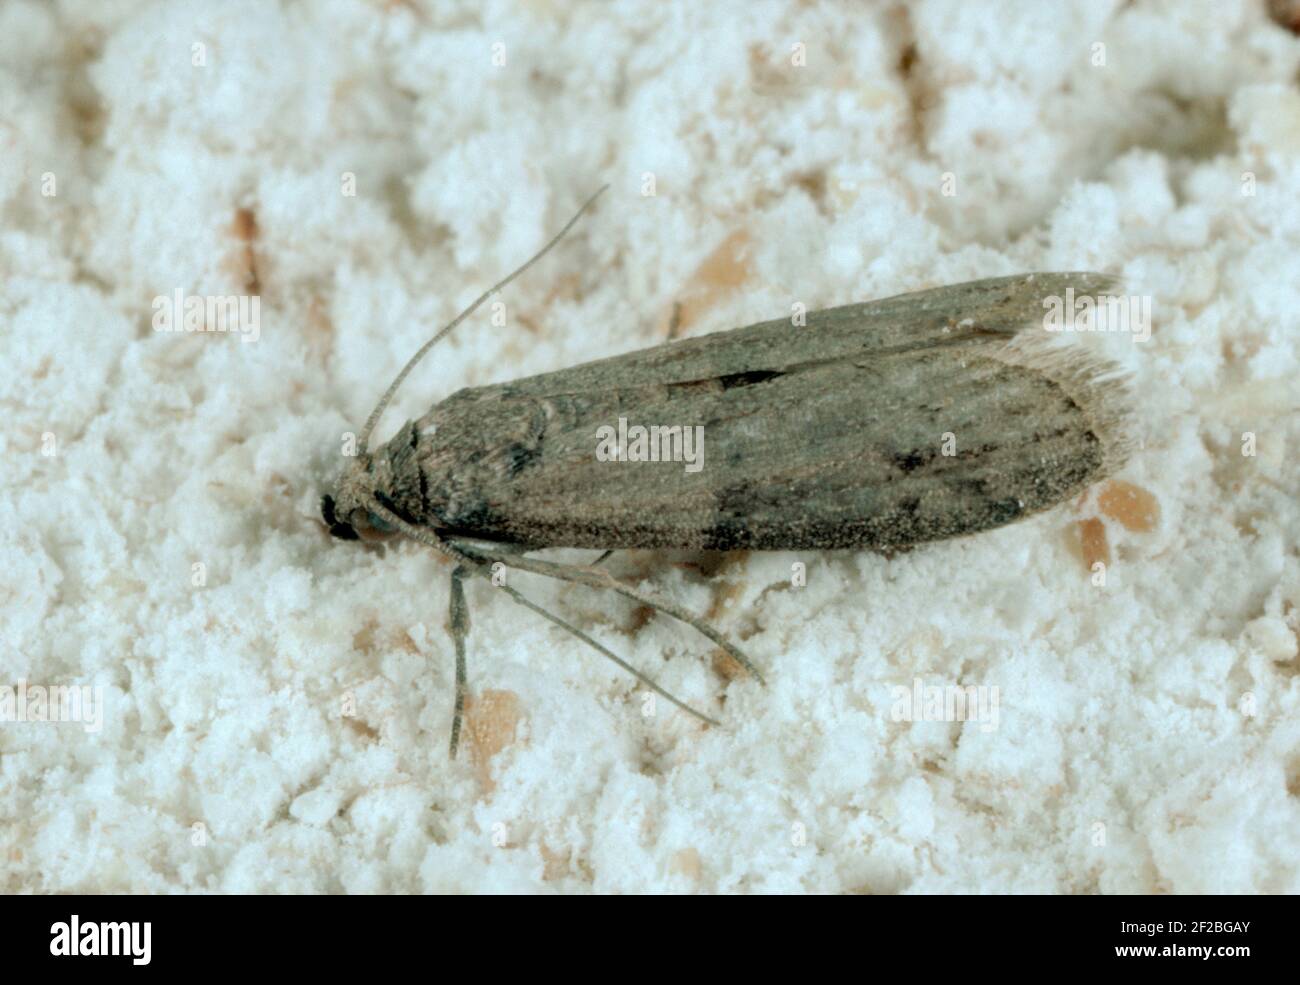 Tropical warehouse moth or almond moth (Ephestia cautella) a pest of stored grain and cereal products on cereal debris Stock Photo